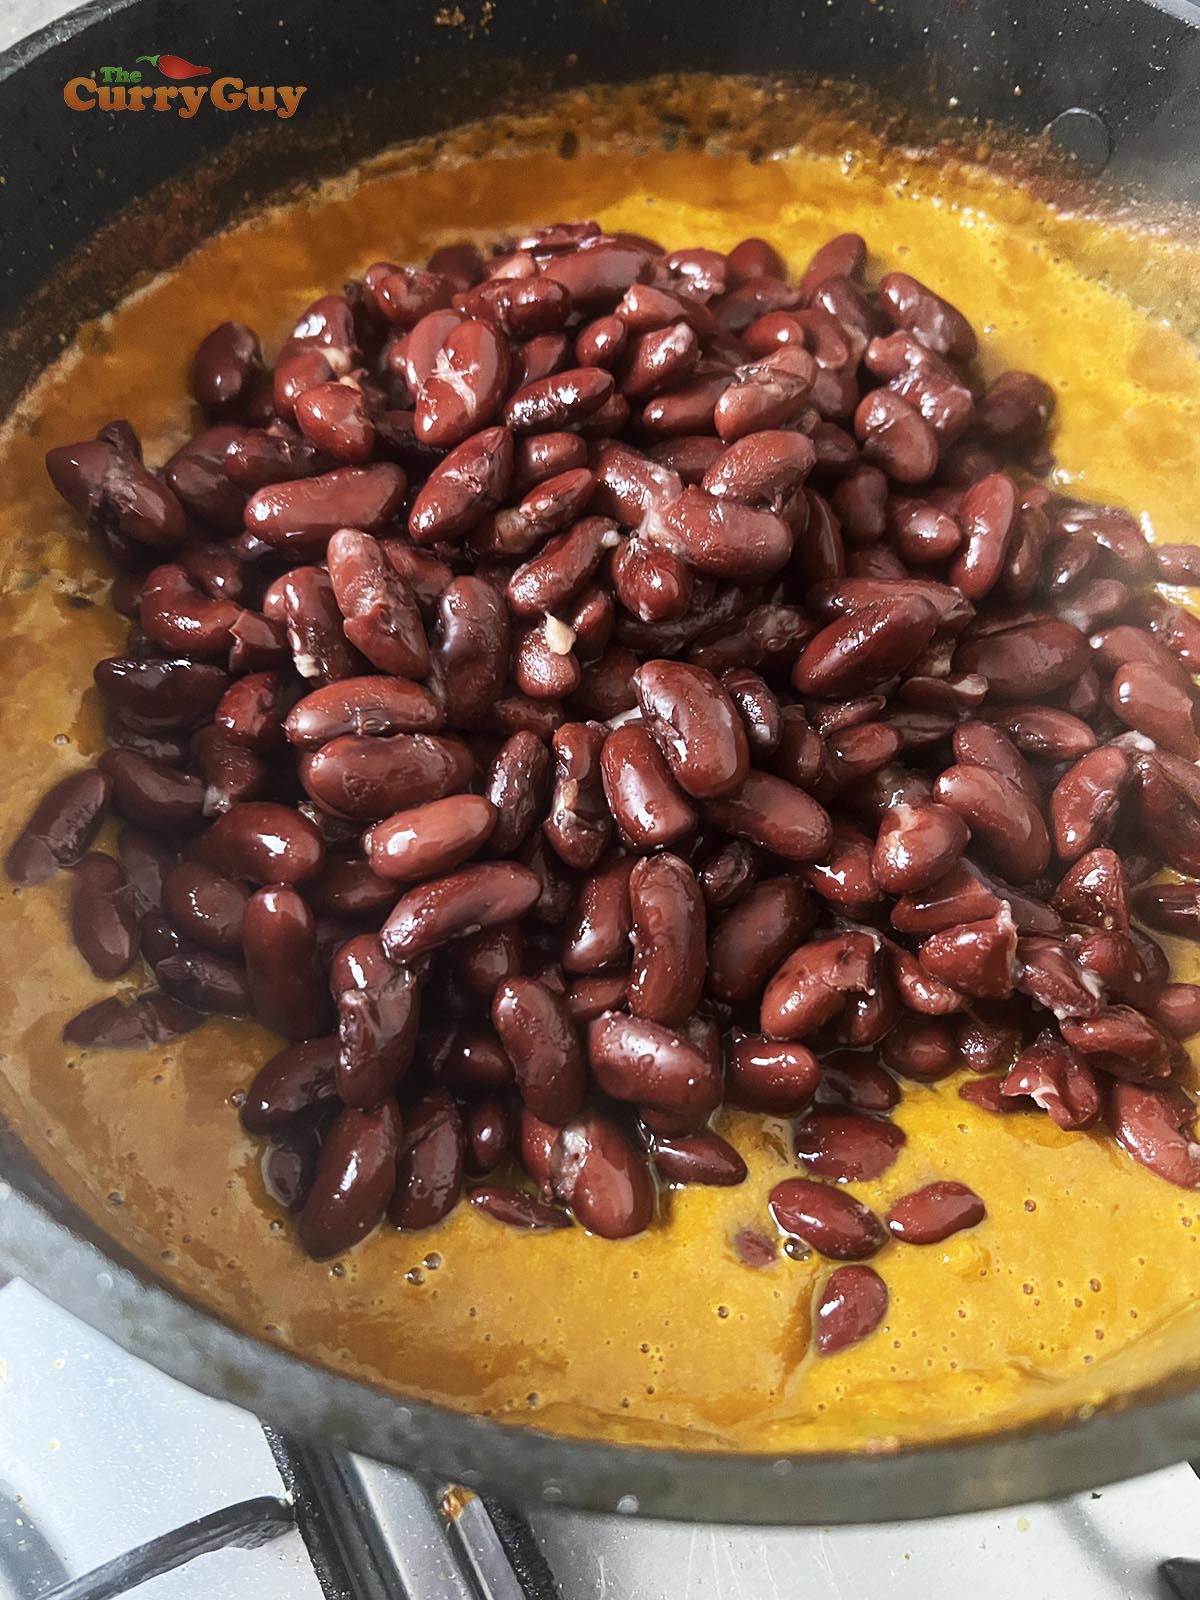 Adding kidney beans to the blended sauce.